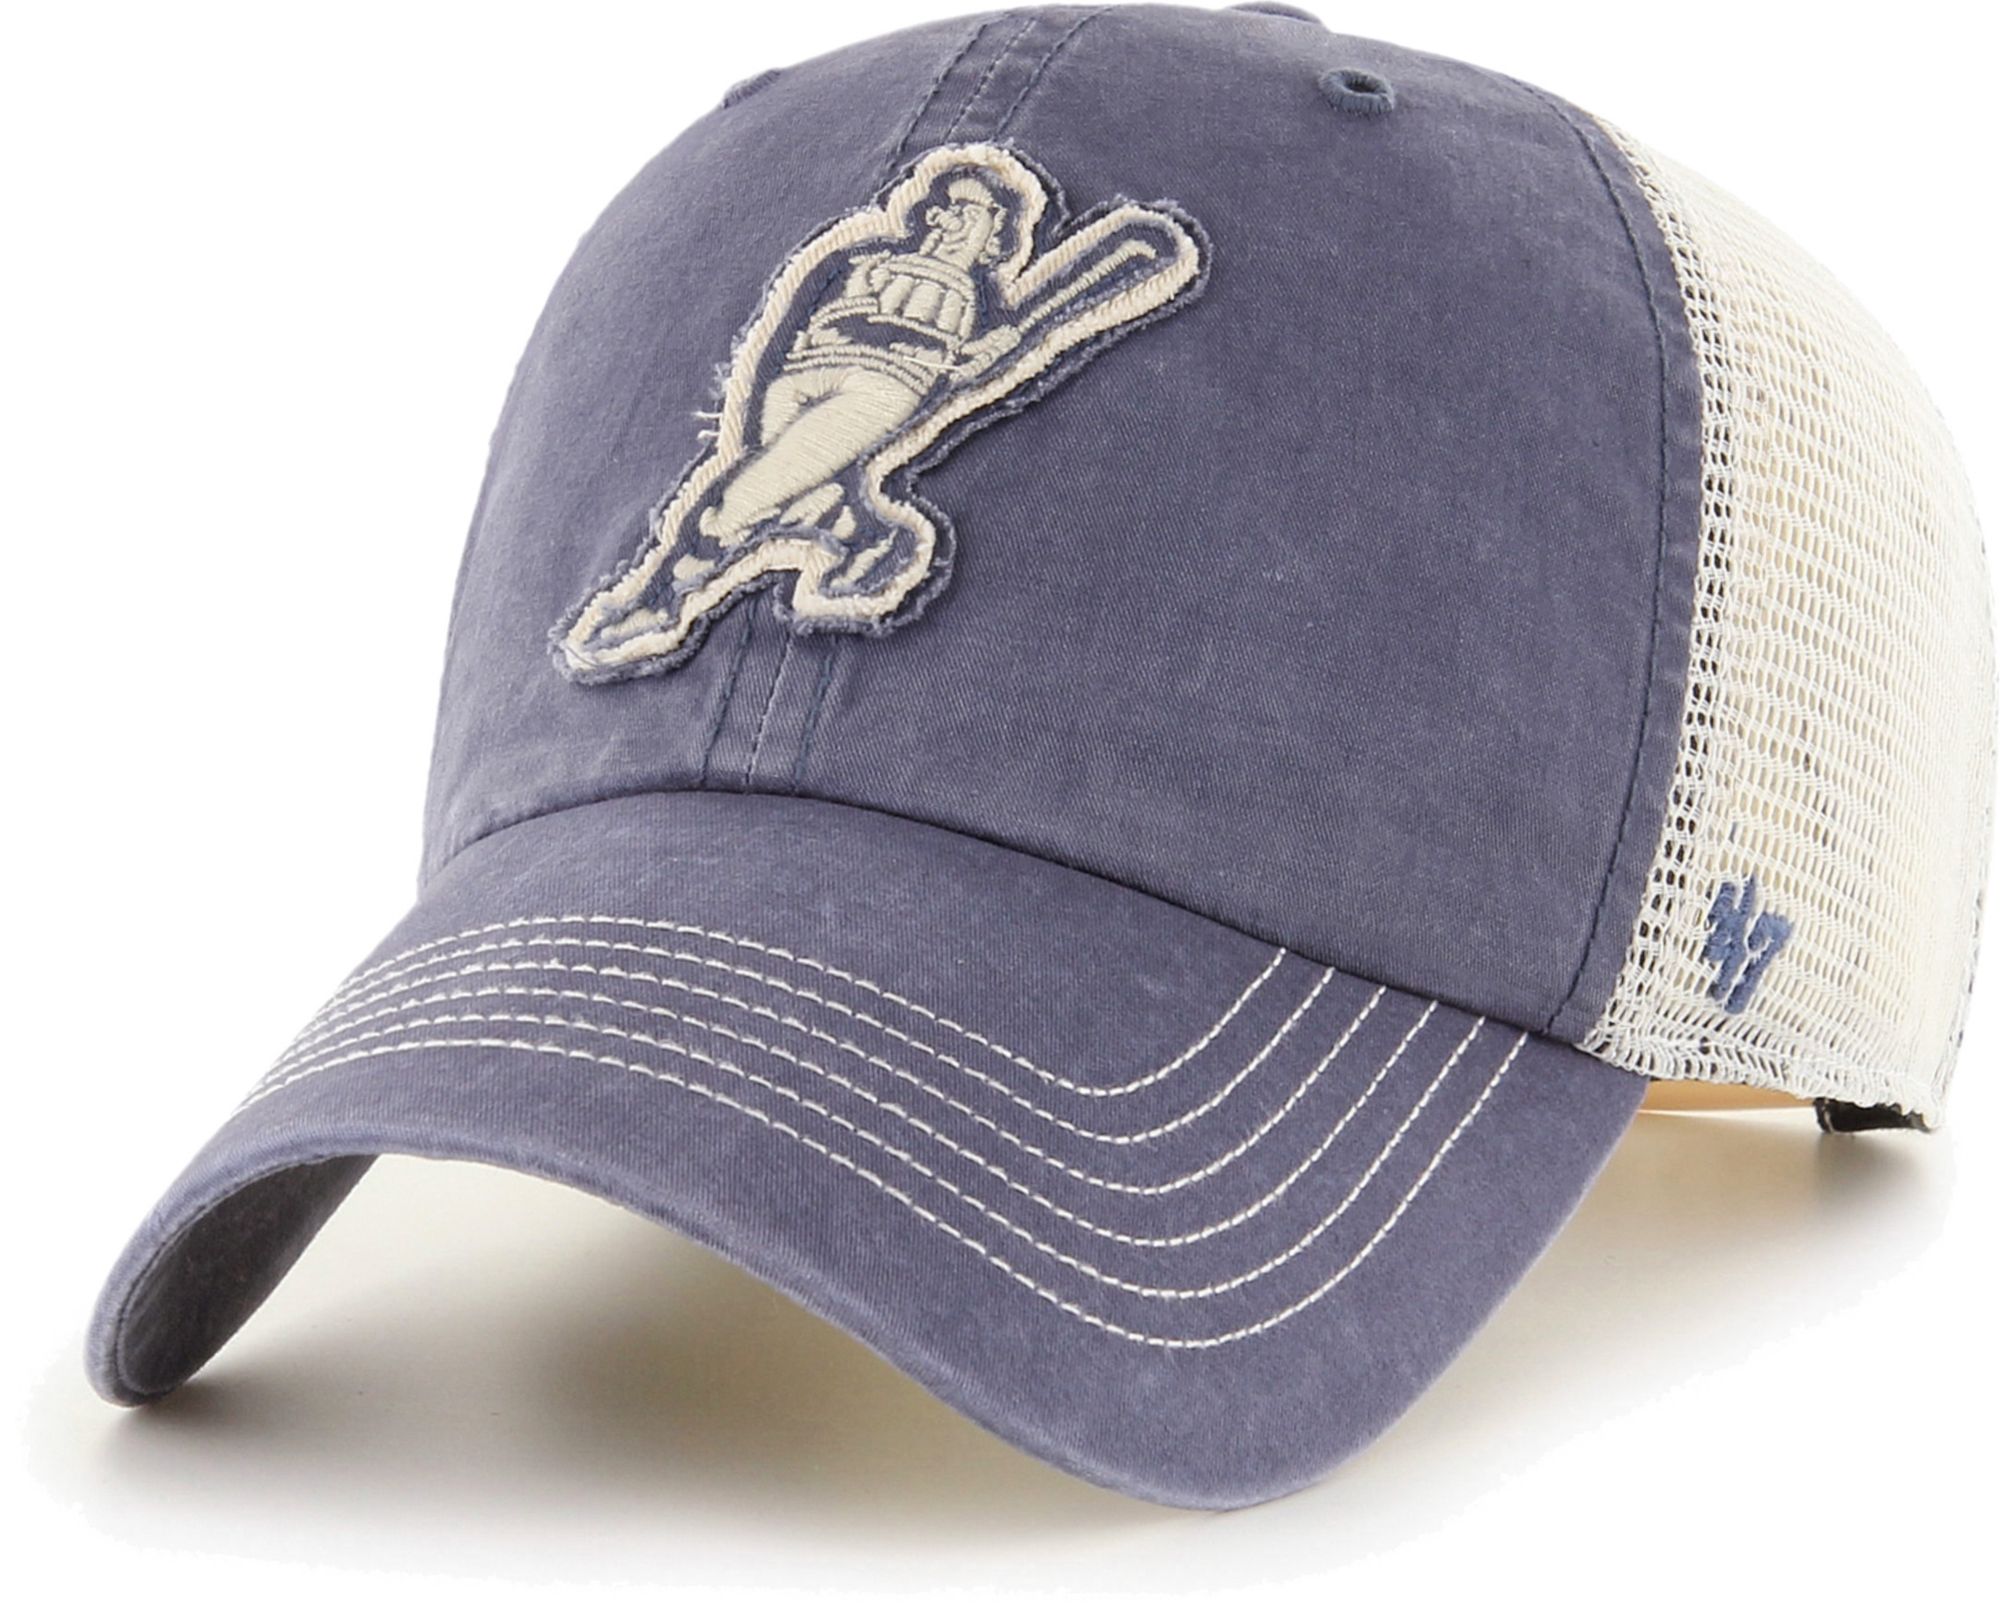 Milwaukee Brewers Hats | MLB Fan Shop at DICK'S